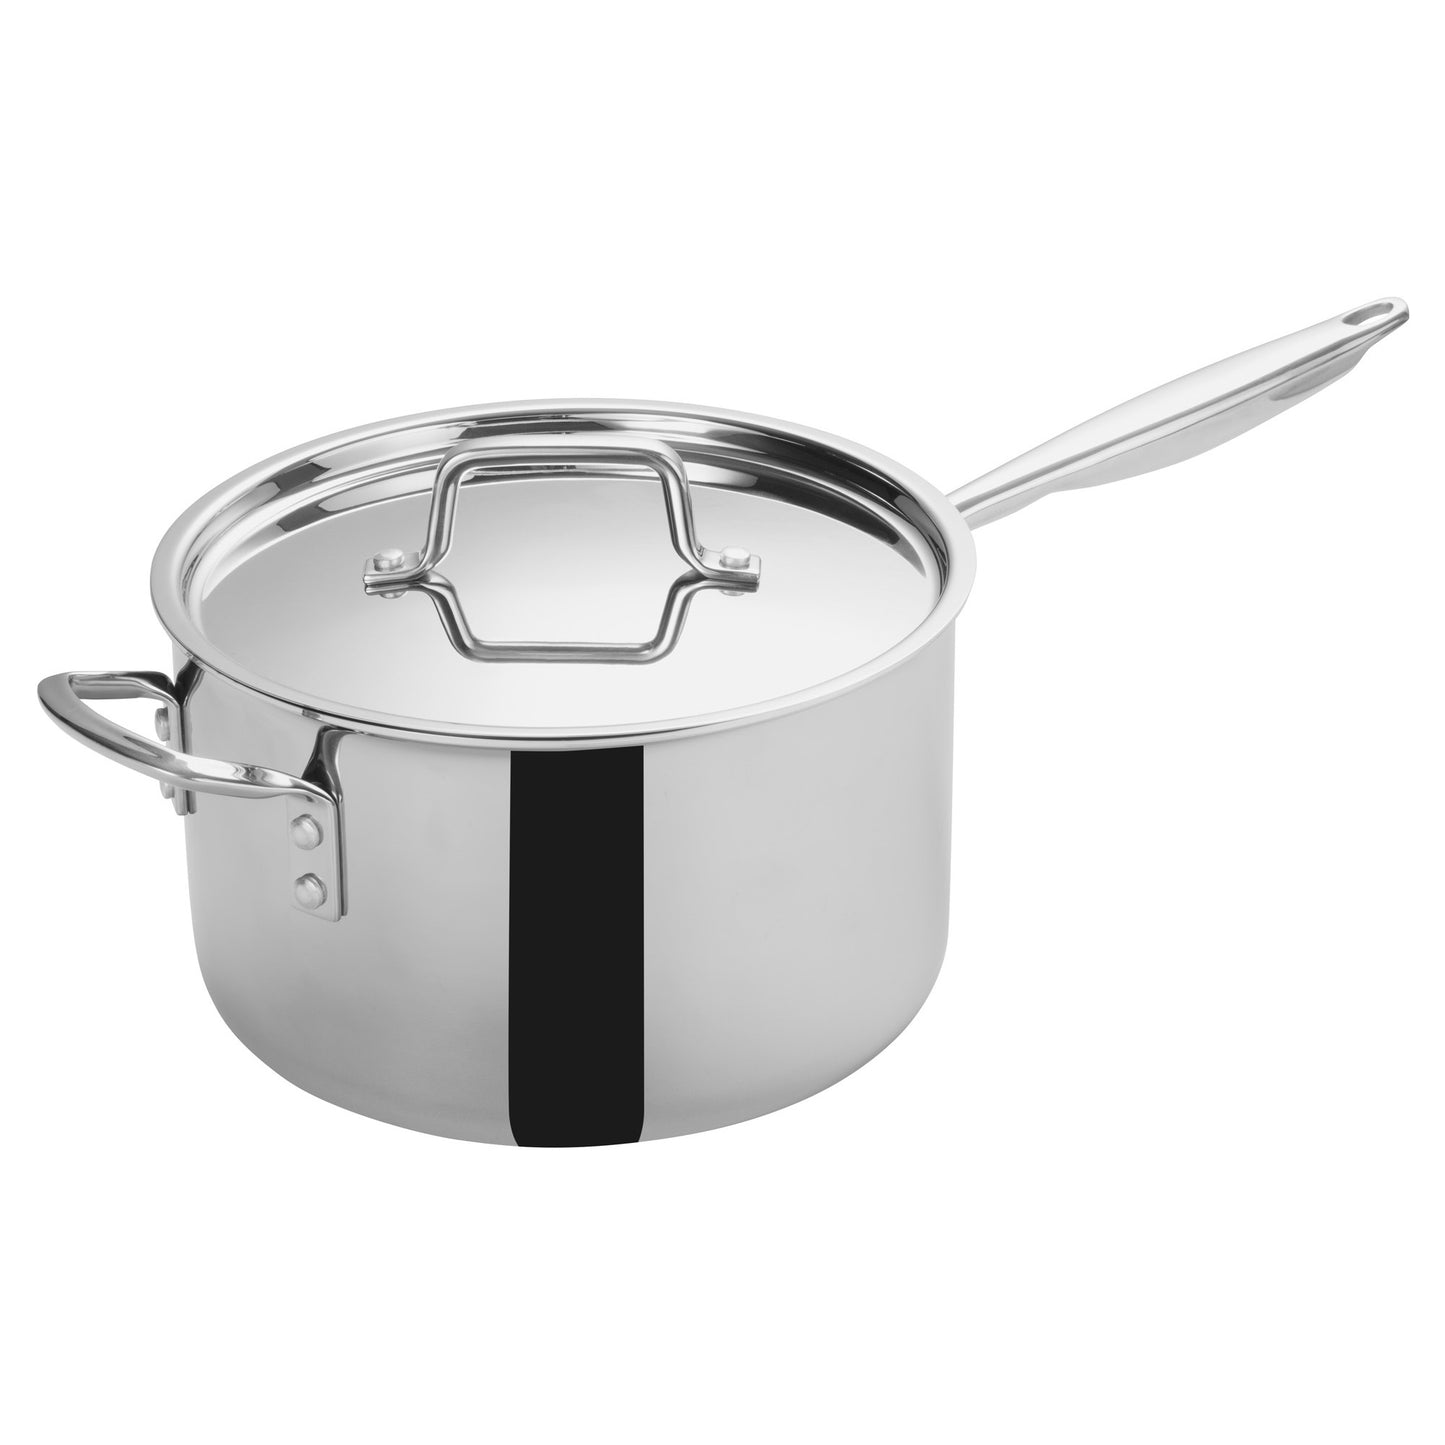 TGAP-7 - Tri-Gen Tri-Ply Stainless Steel Sauce Pan with Cover - 7 Quart